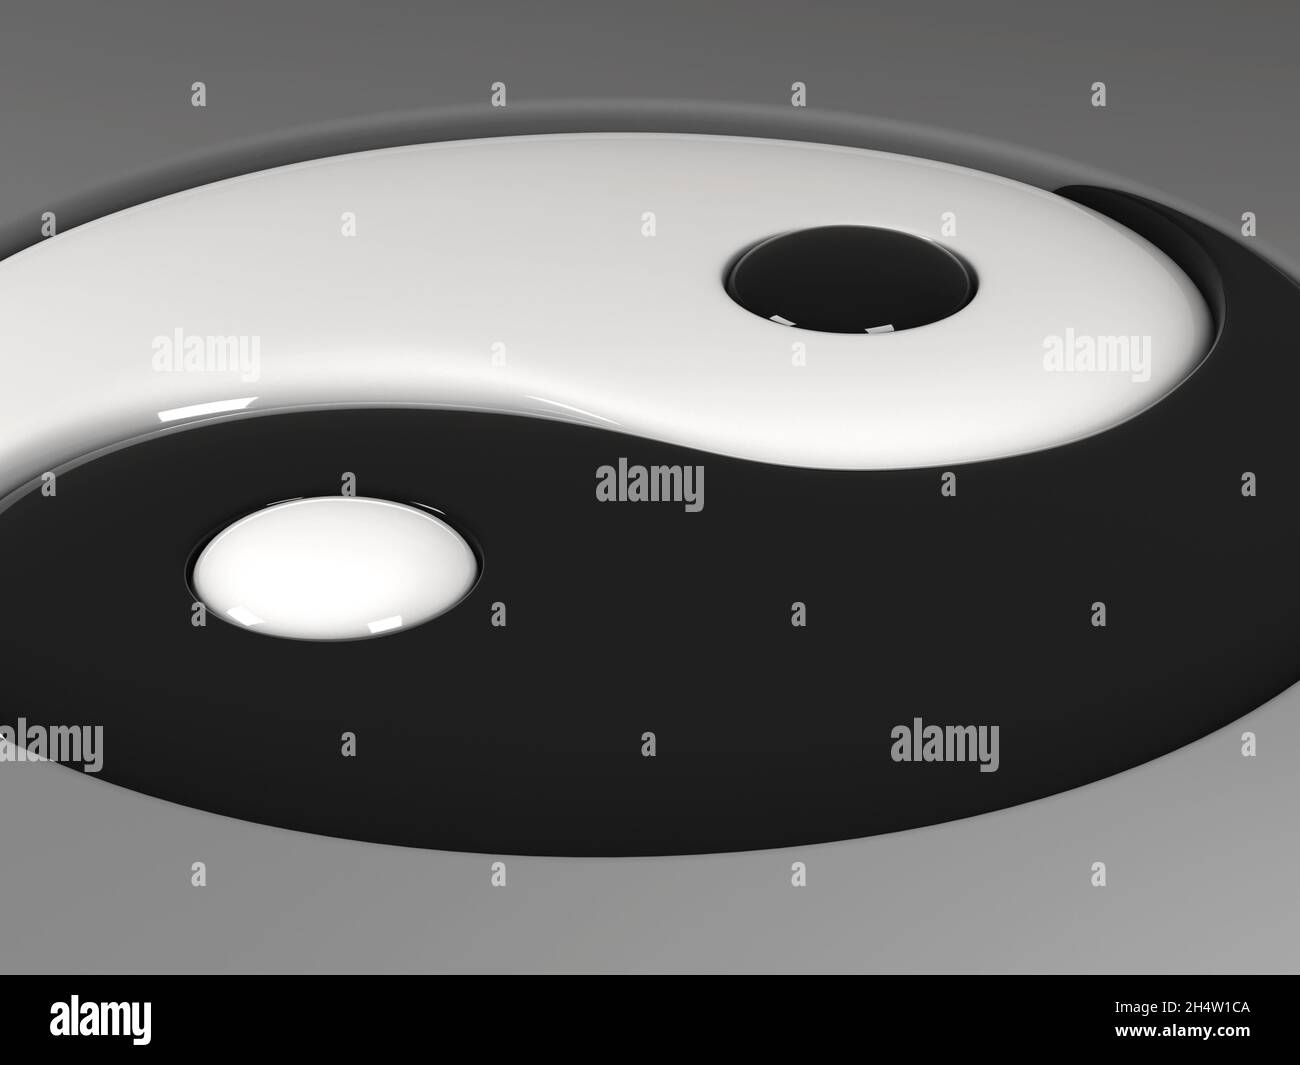 3d rendering of the ancient symbol of Tao (yin and yang) with a liquid glossy look Stock Photo